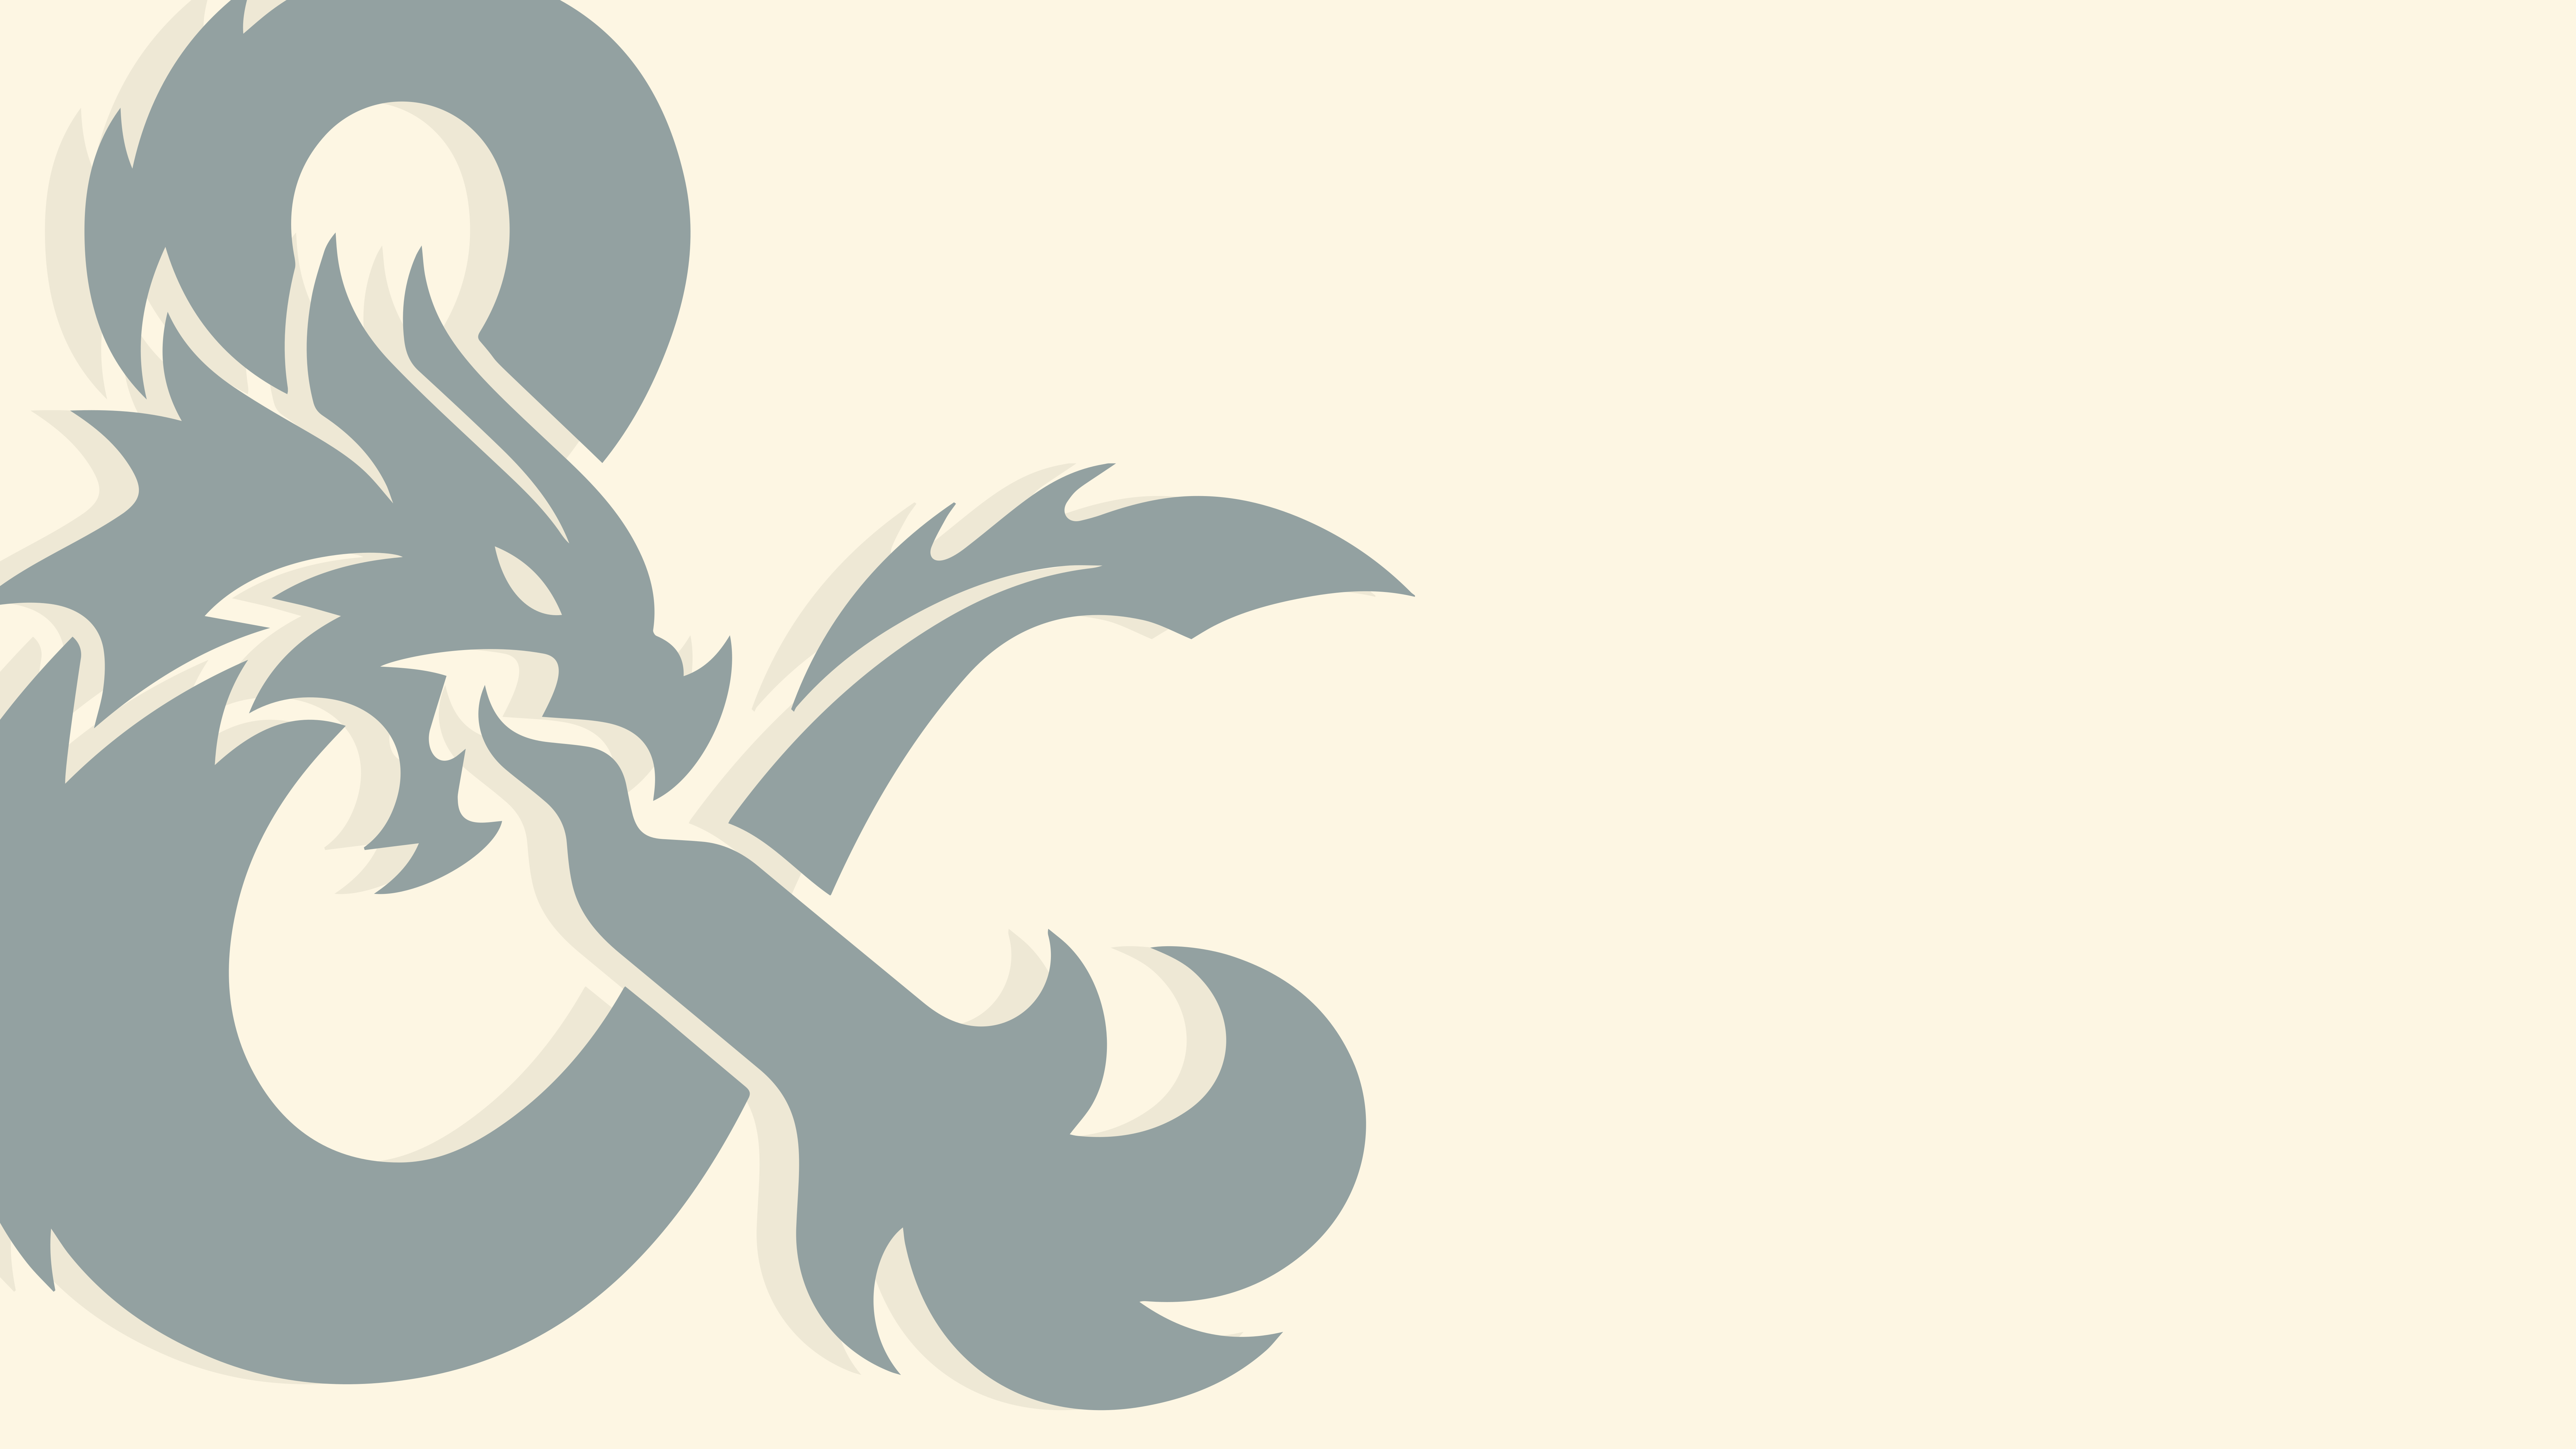 General 7680x4320 solarized colorscheme Dungeons & Dragons minimalism vector simple background dragon